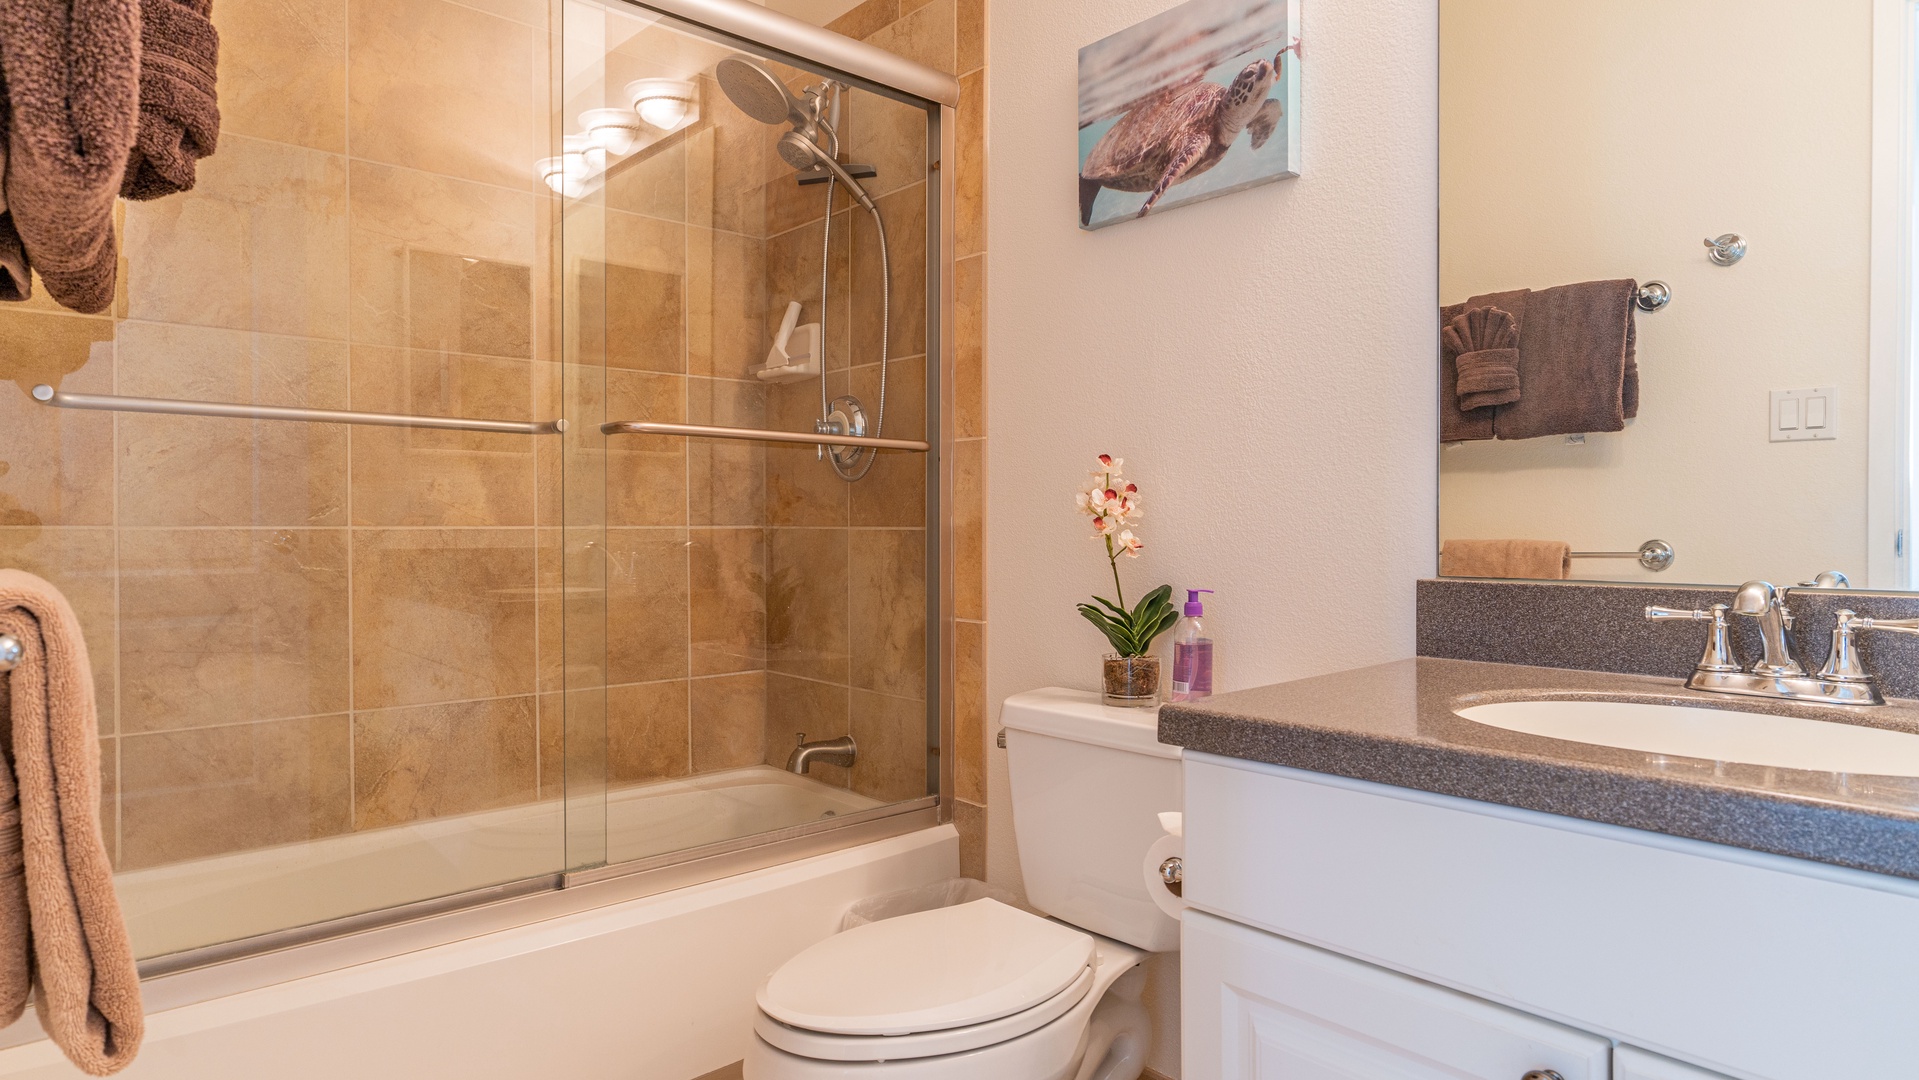 Kapolei Vacation Rentals, Ko Olina Kai 1057B - The second guest bedroom with a tub and shower combo.